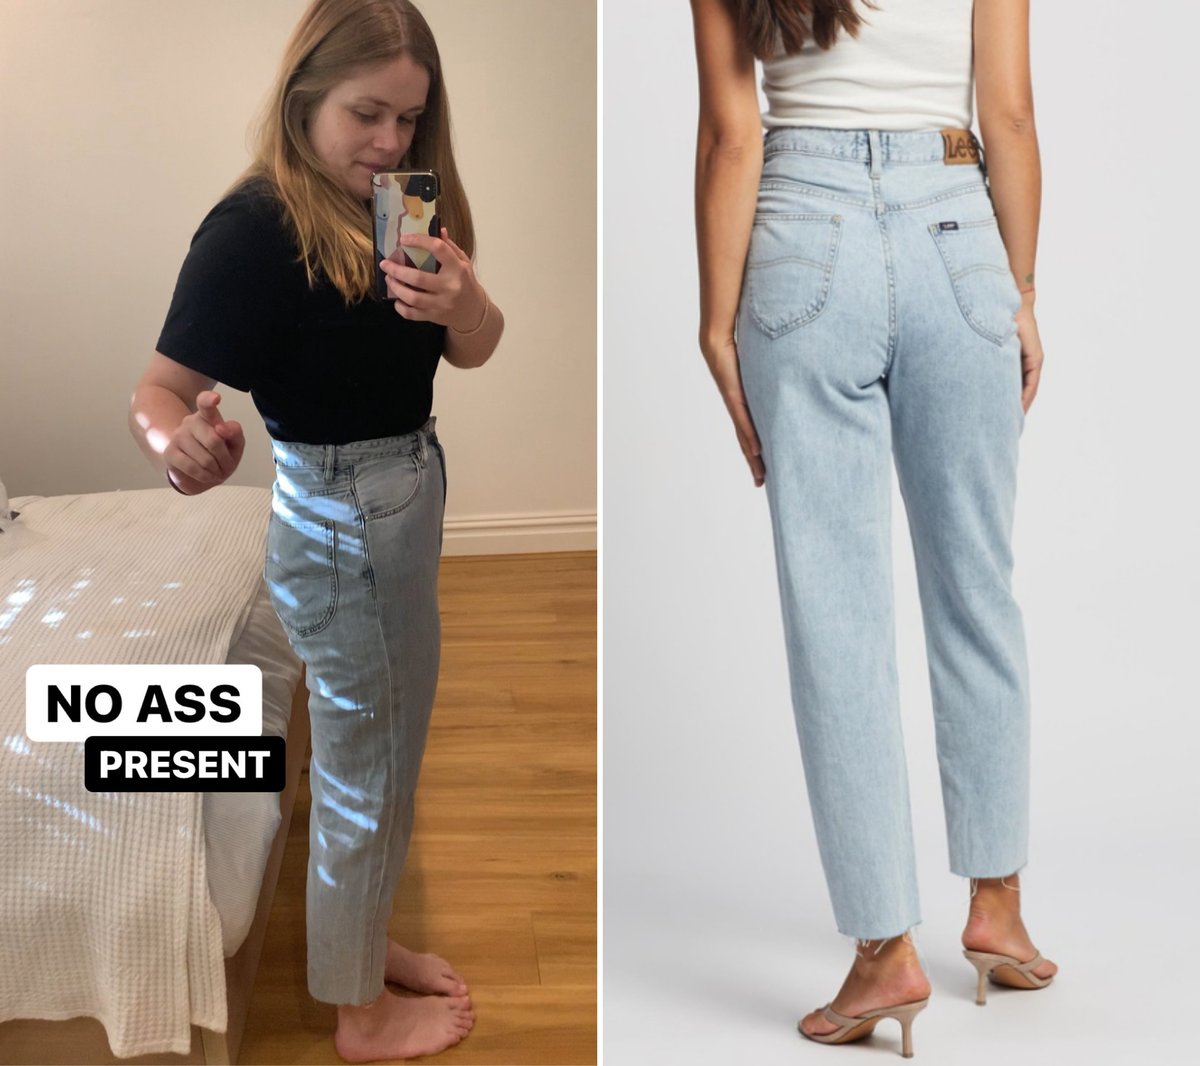 SMALL BUTT STYLING TIPS - How to look good with a flat butt 